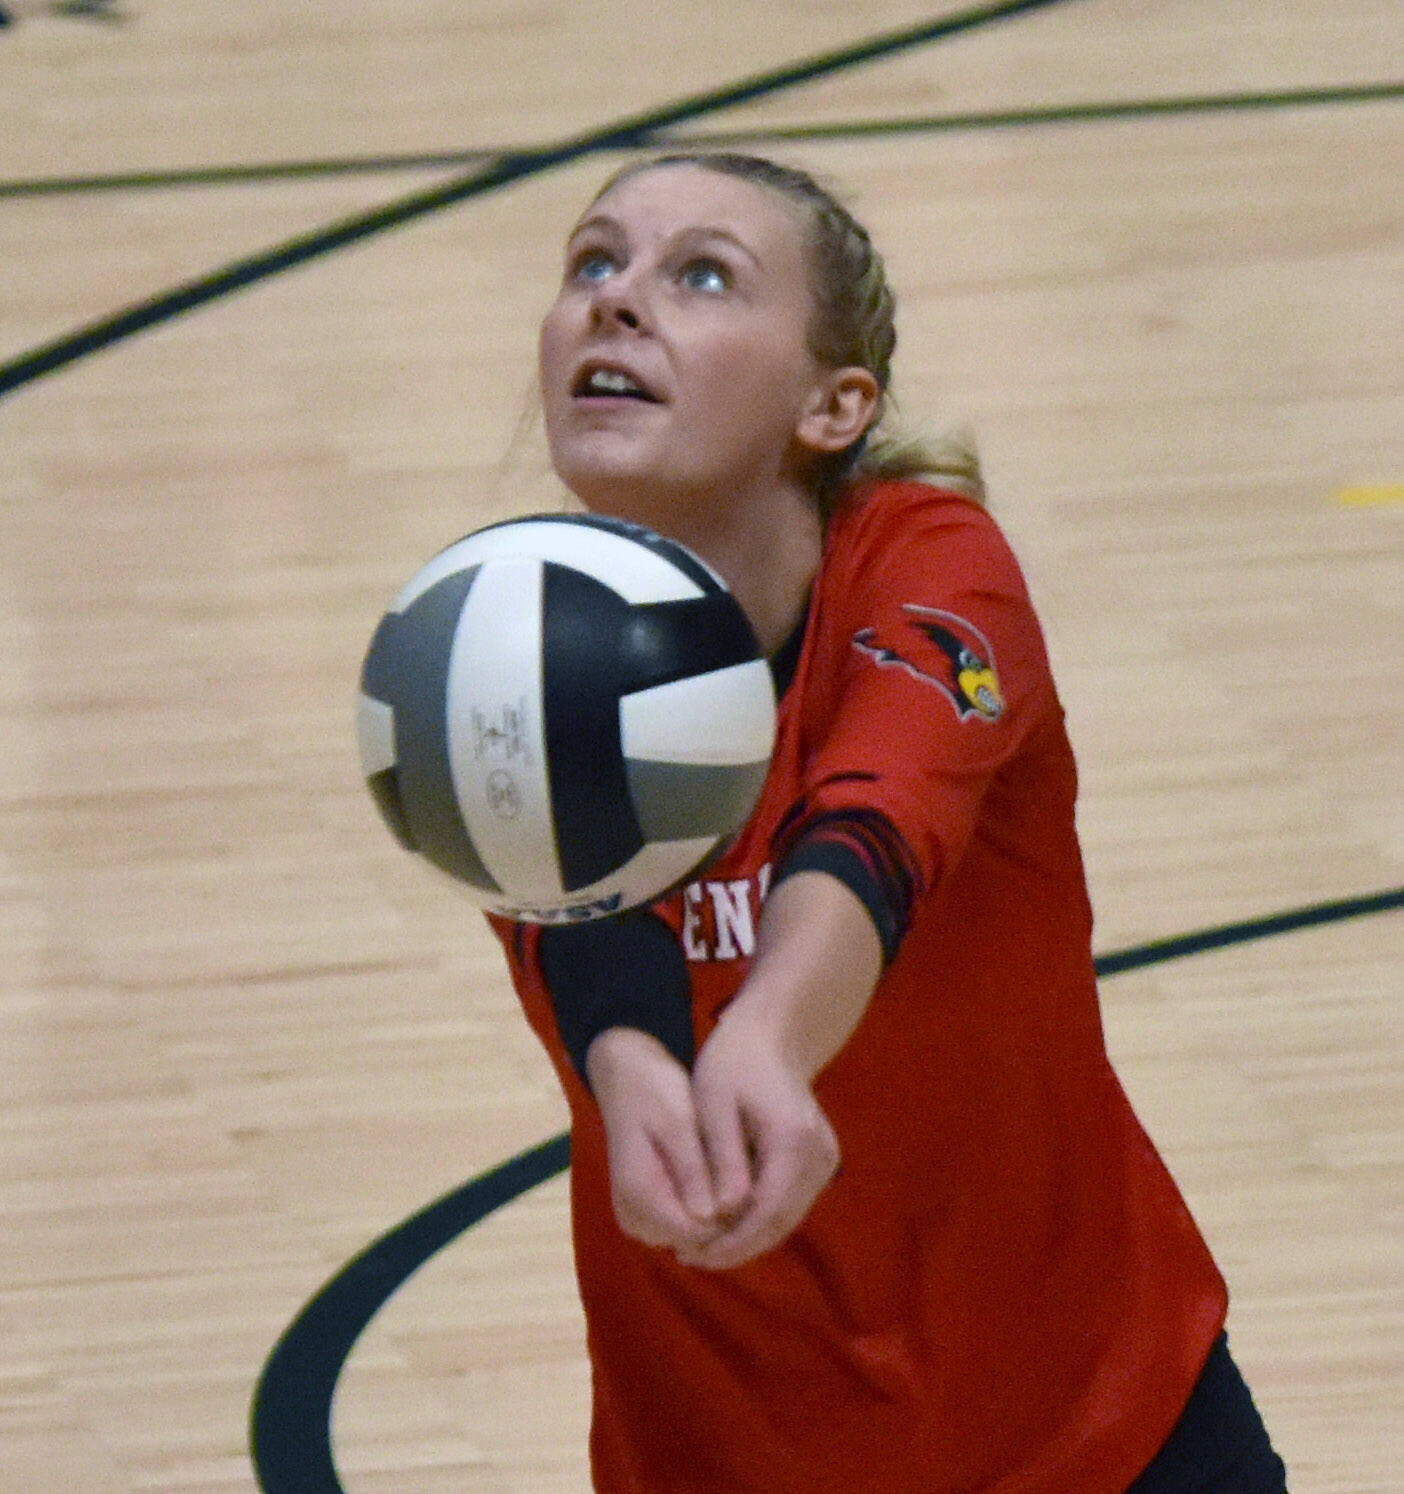 Kenai’s Kimberly Chanley digs up a ball Saturday, Nov. 12, 2022, in the Class 3A state championship at the Alaska Airlines Center in Anchorage, Alaska. (Photo by Jeff Helminiak/Peninsula Clarion)